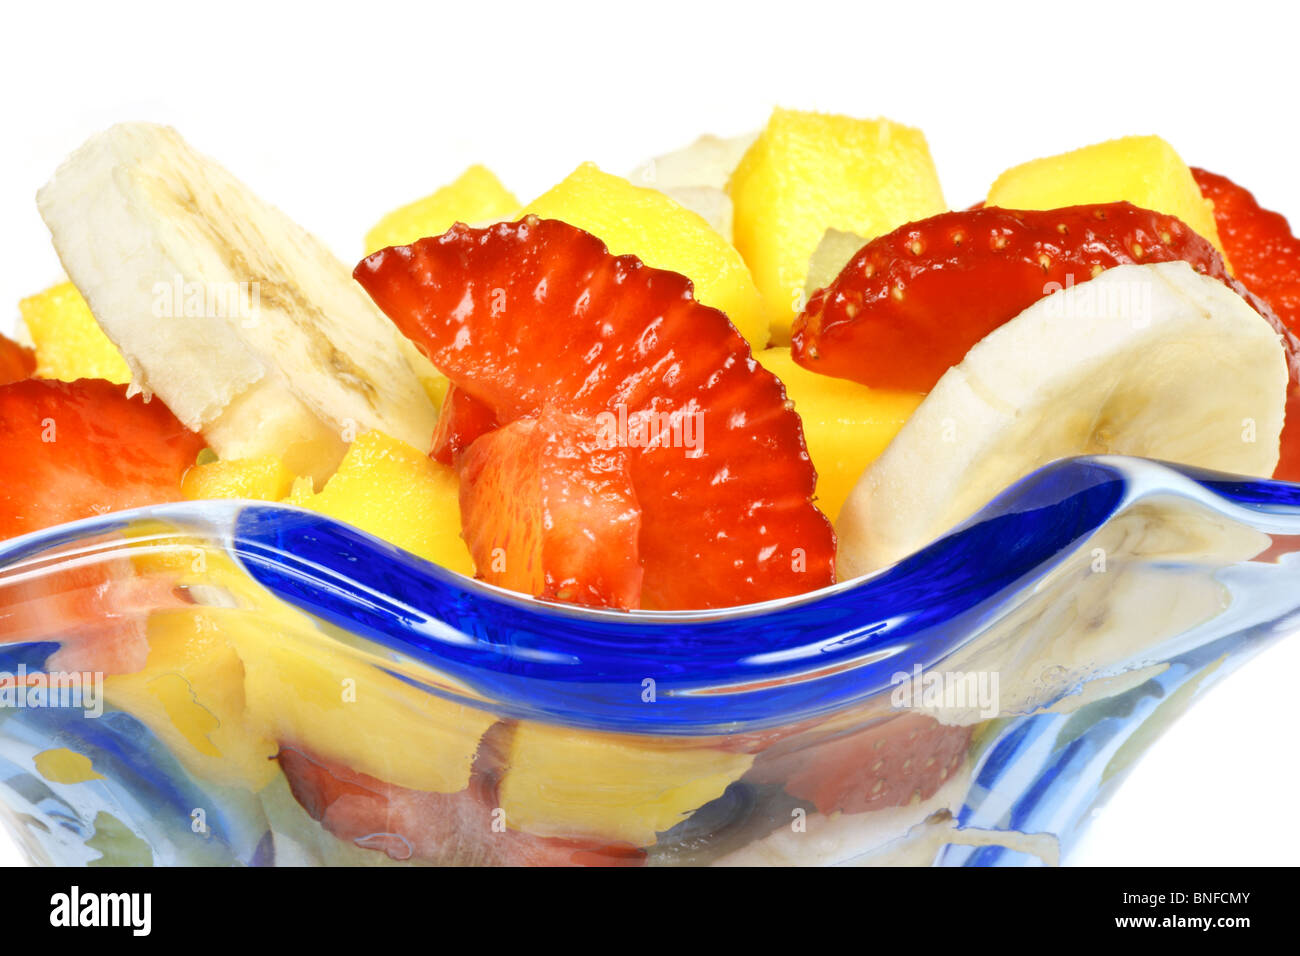 Close-up of a colorful fresh fruit salad in a blue glass cup. Stock Photo